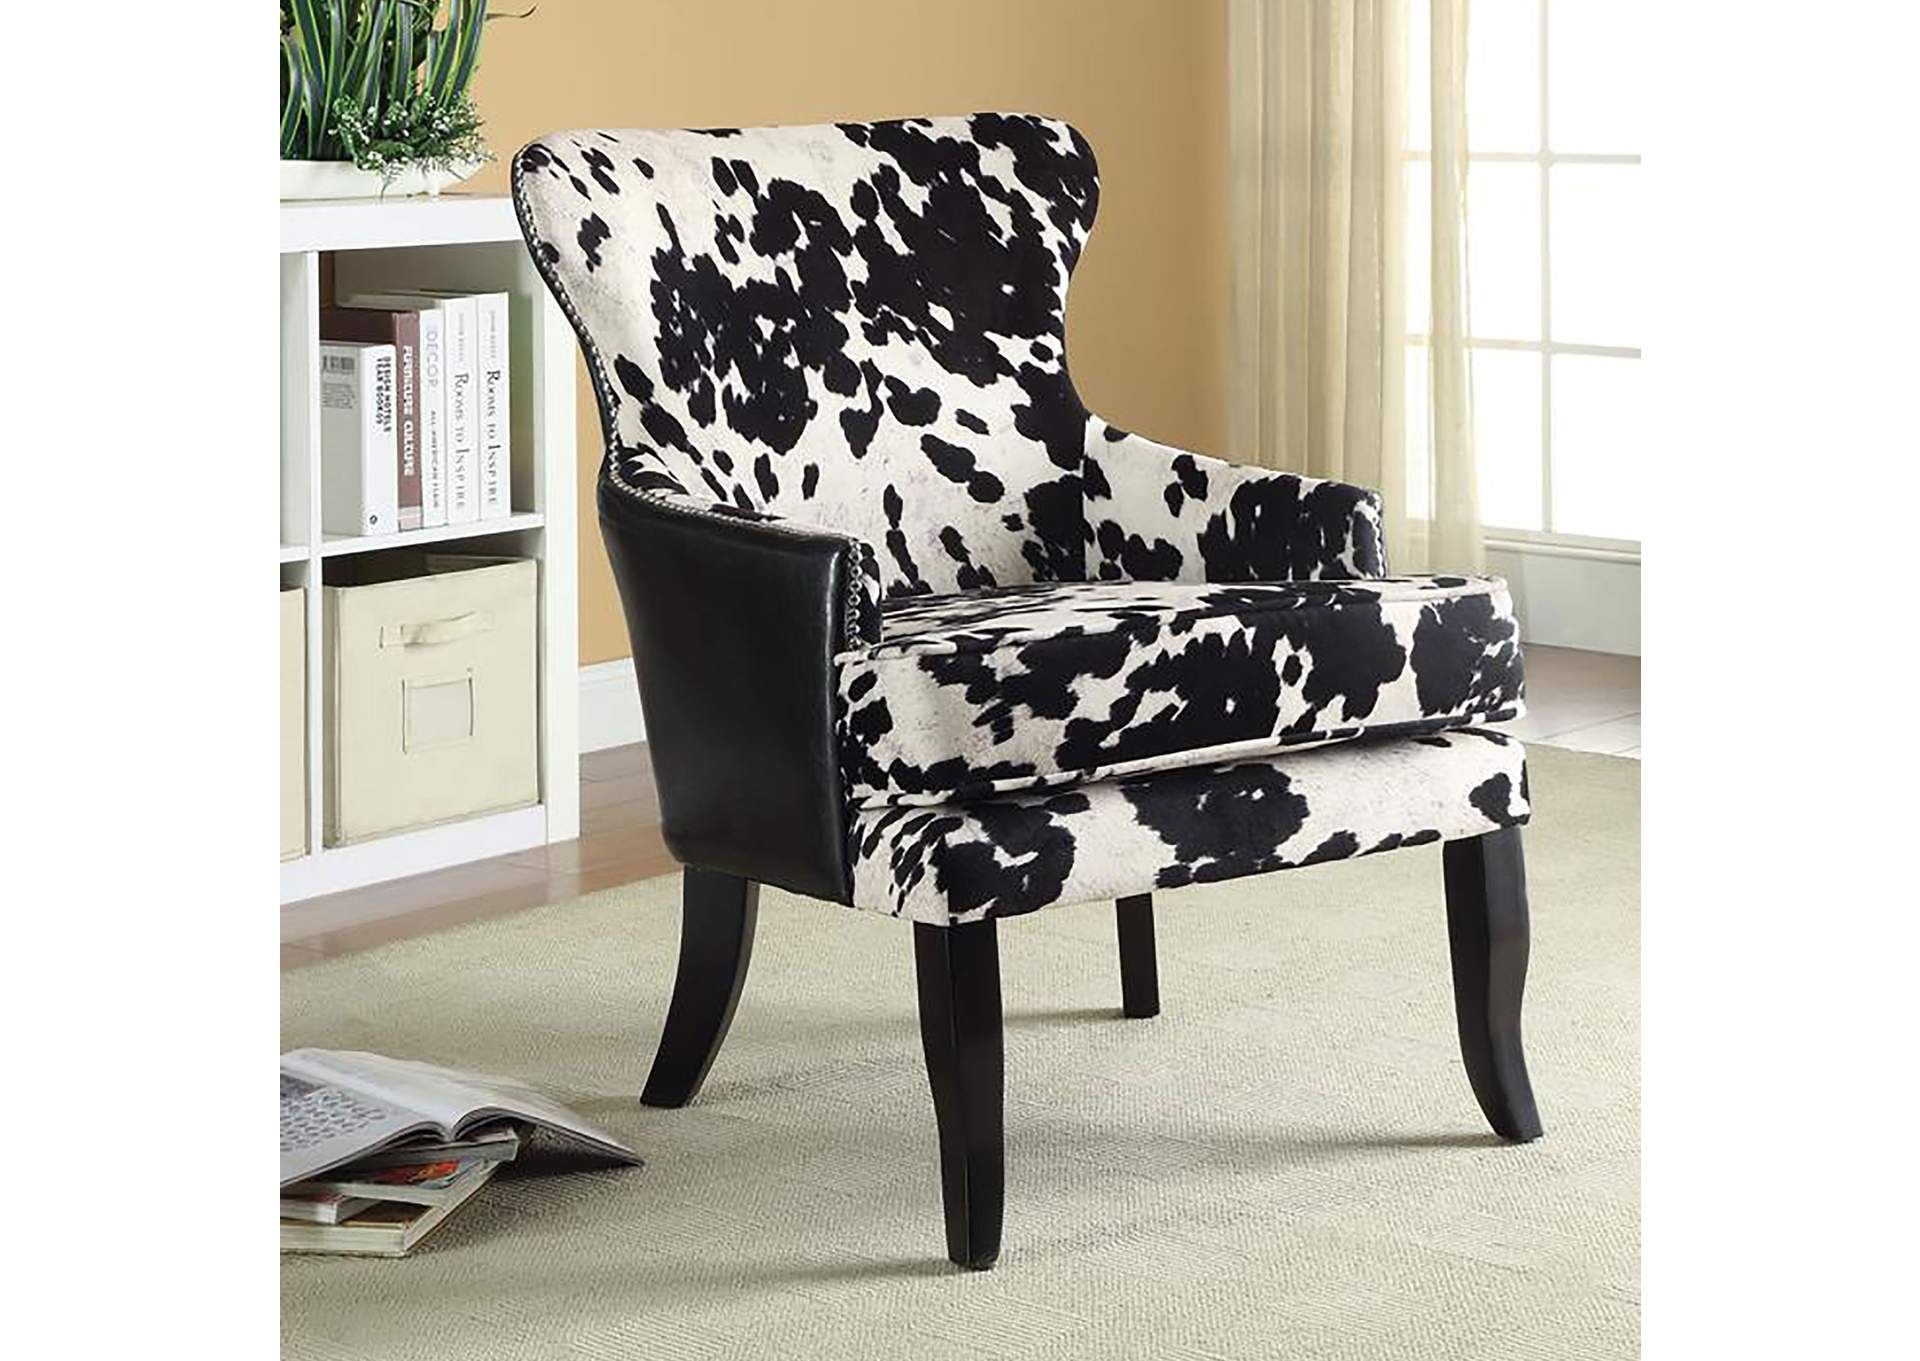 Trea Cowhide Print Accent Chair Black and White,Coaster Furniture